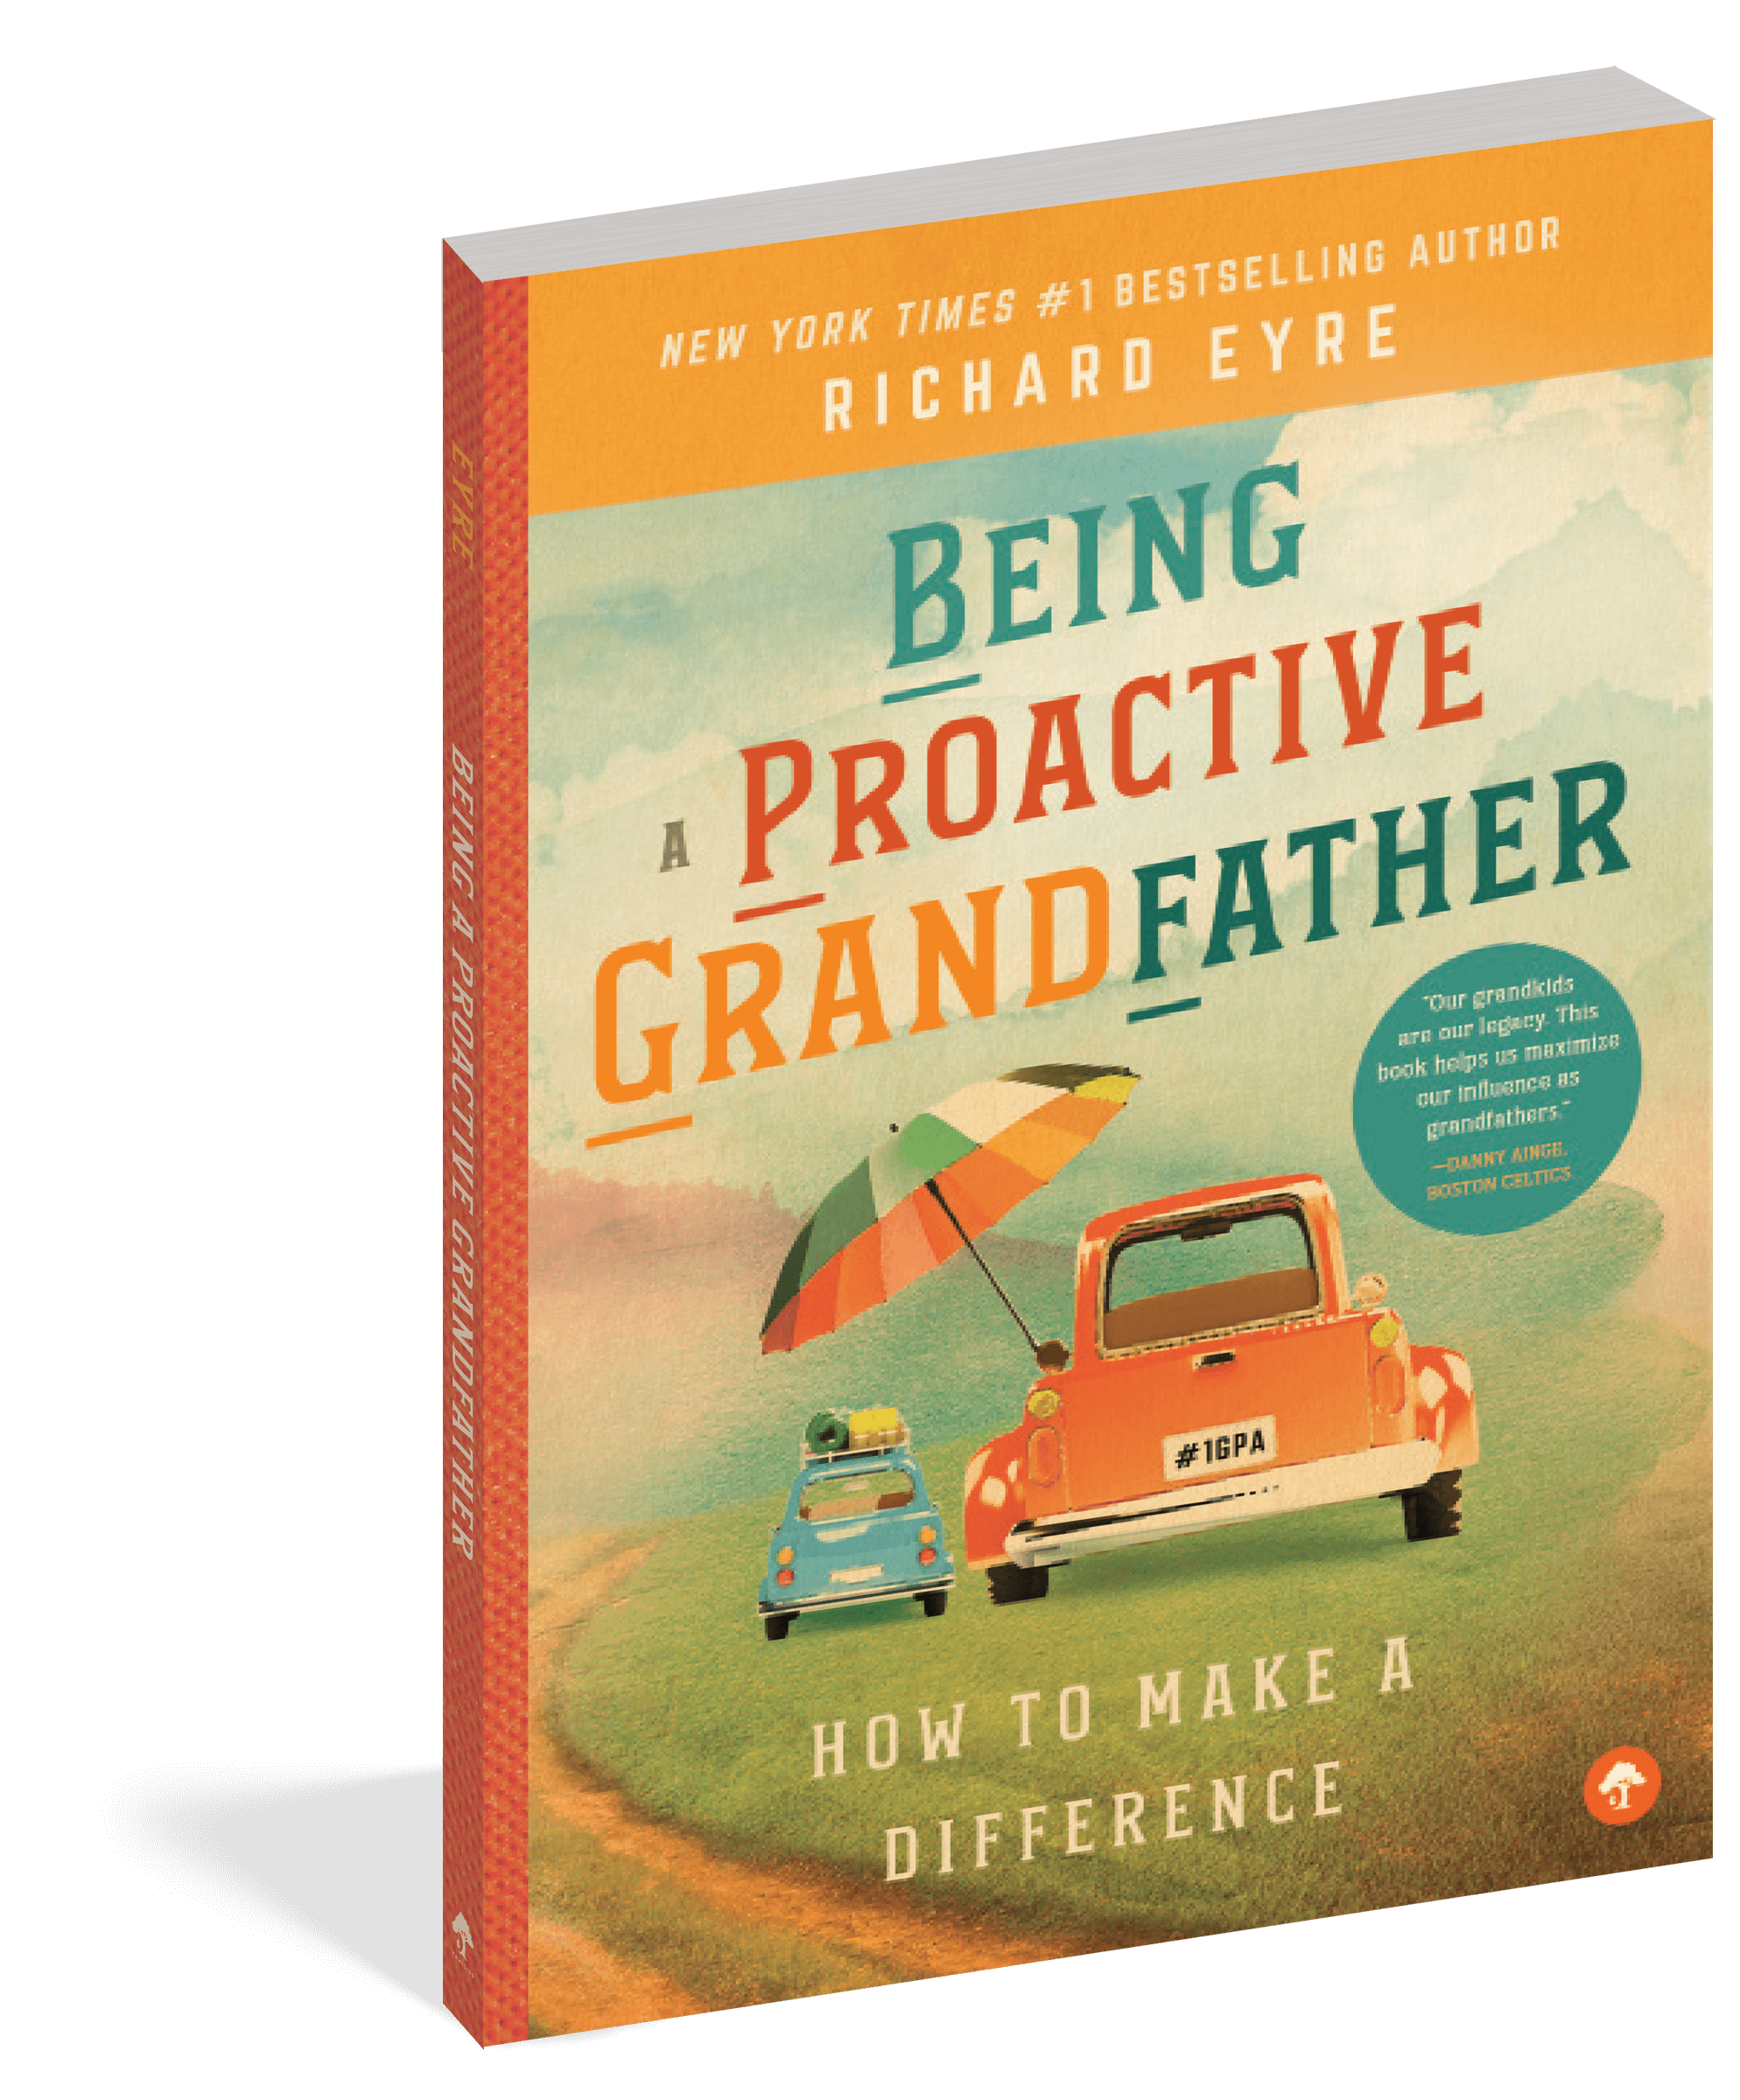 The cover of the book Being a Proactive Grandfather.